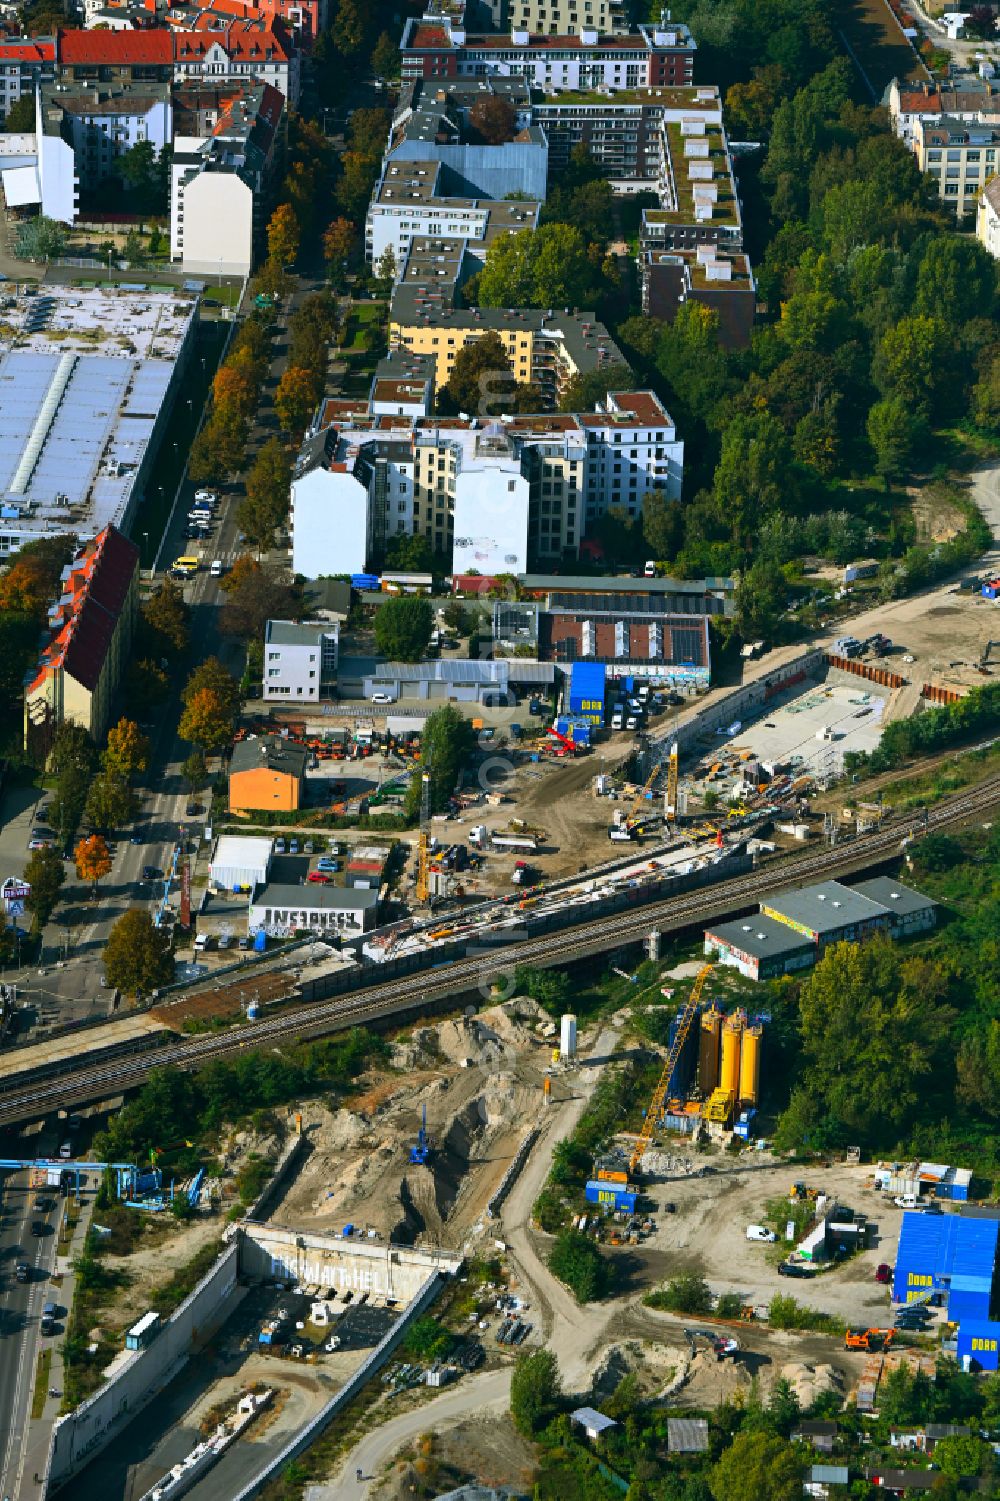 Aerial image Berlin - Civil engineering construction sites for the new construction of the tunnels to extend the city autobahn - federal autobahn BAB A100 in Berlin, Germany